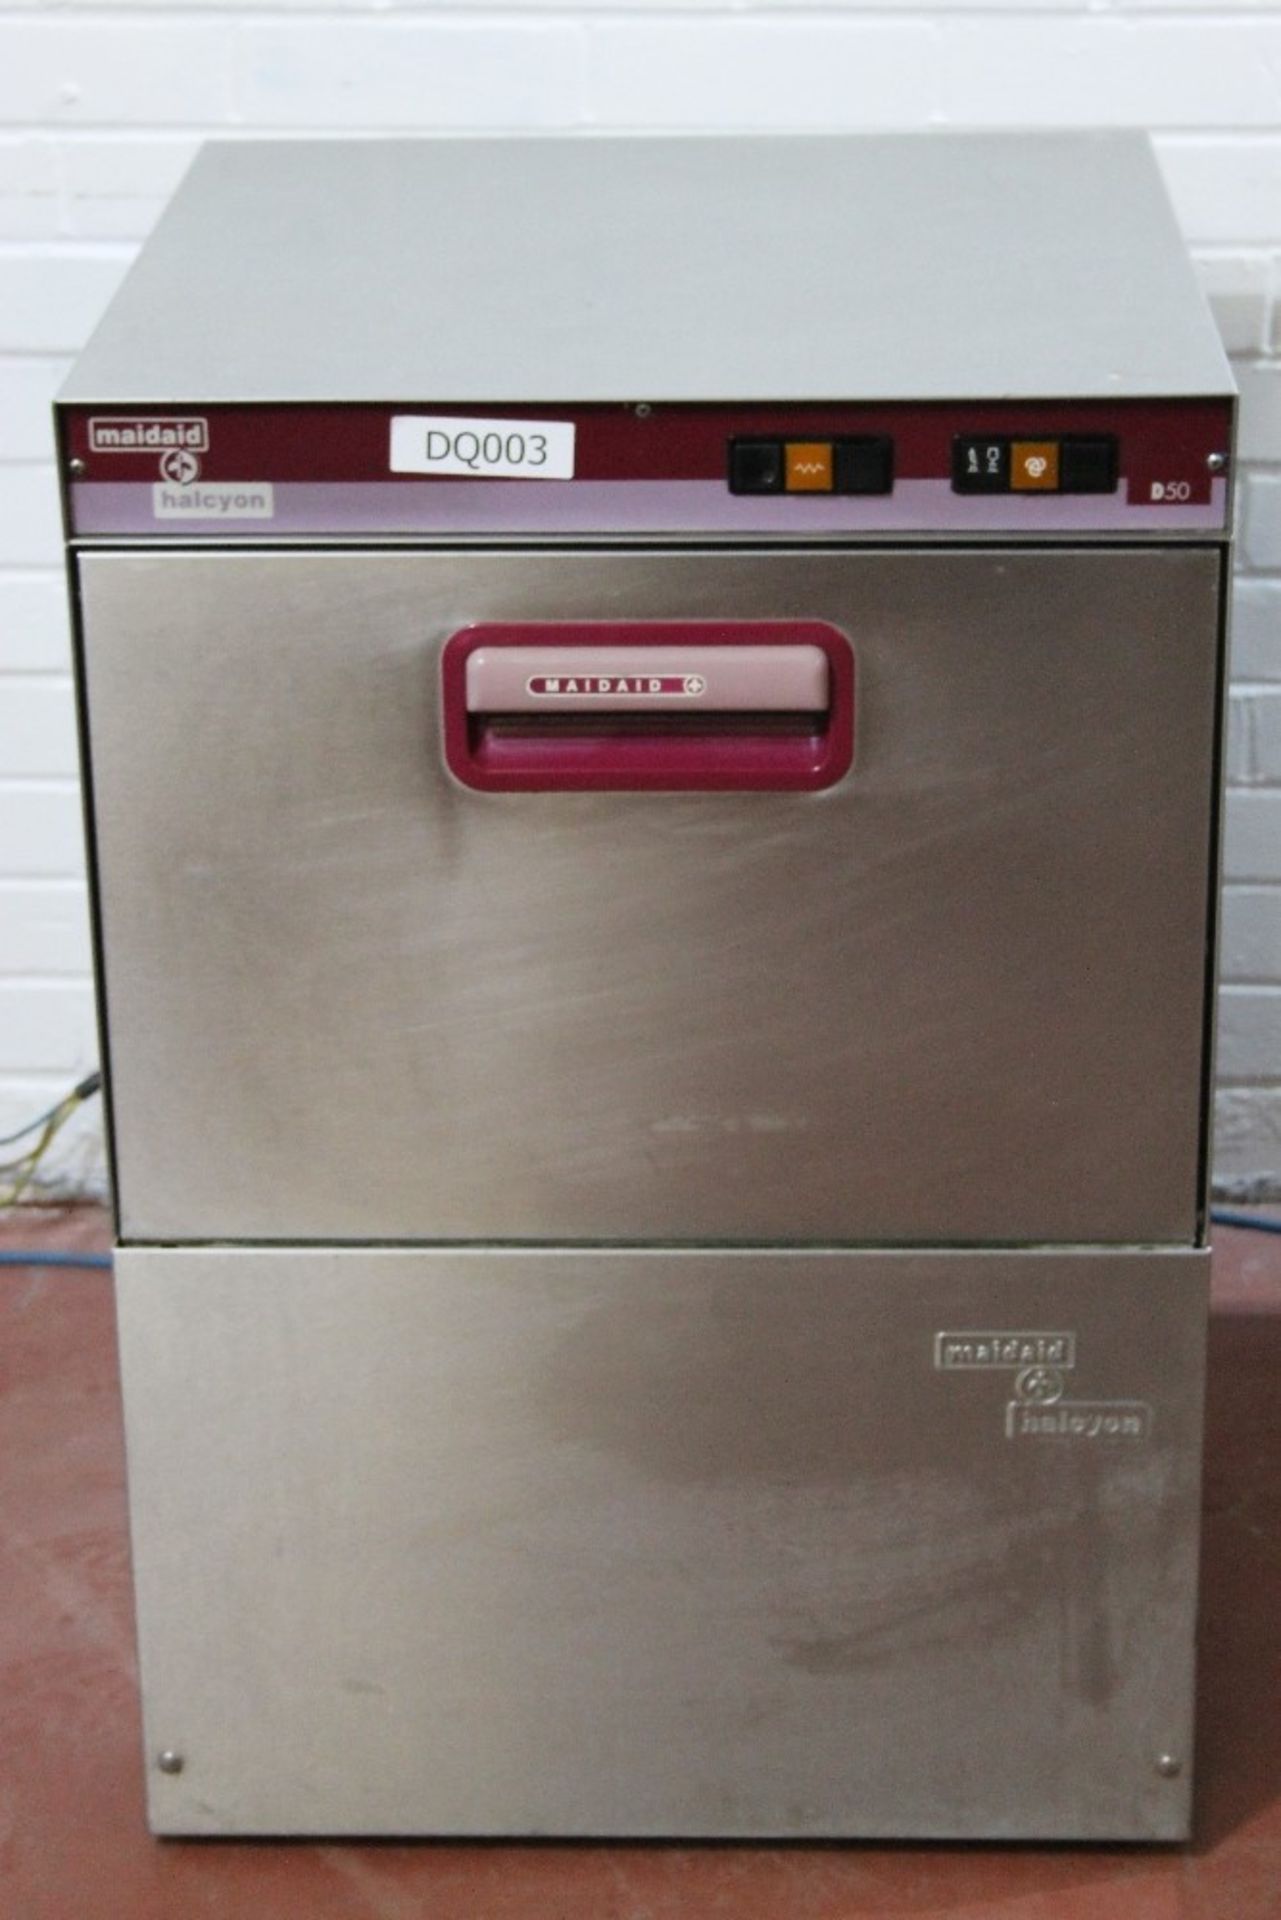 Maidaid Halcyon D50 Dishwasher – with Basket Tested – NO VAT - Image 2 of 2